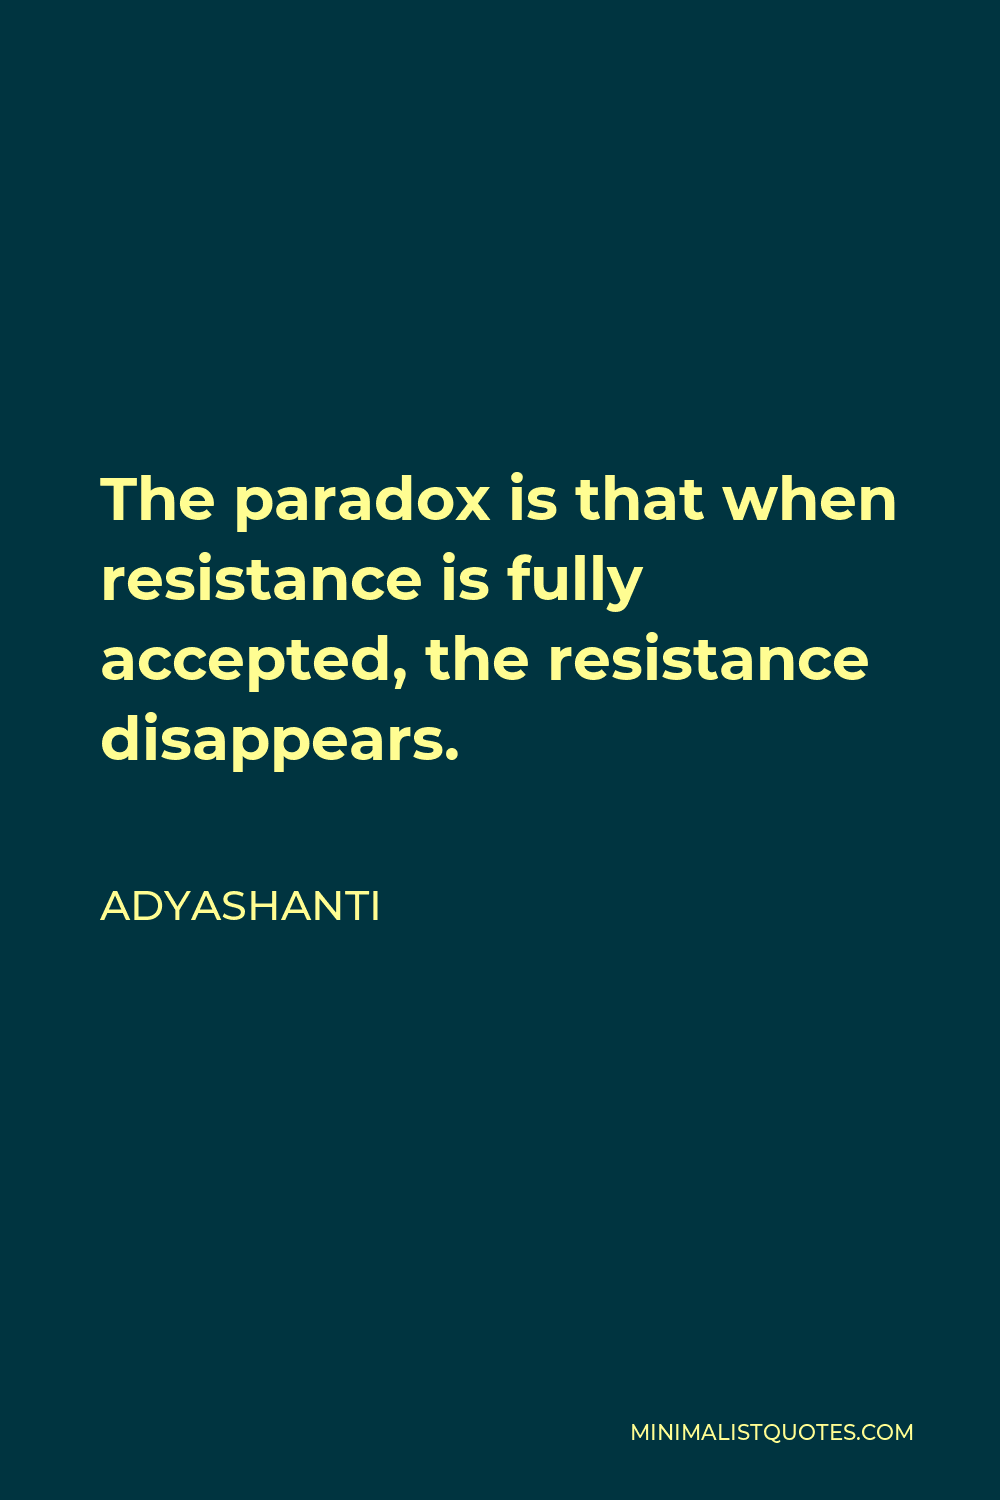 Adyashanti Quote - The paradox is that when resistance is fully accepted, the resistance disappears.